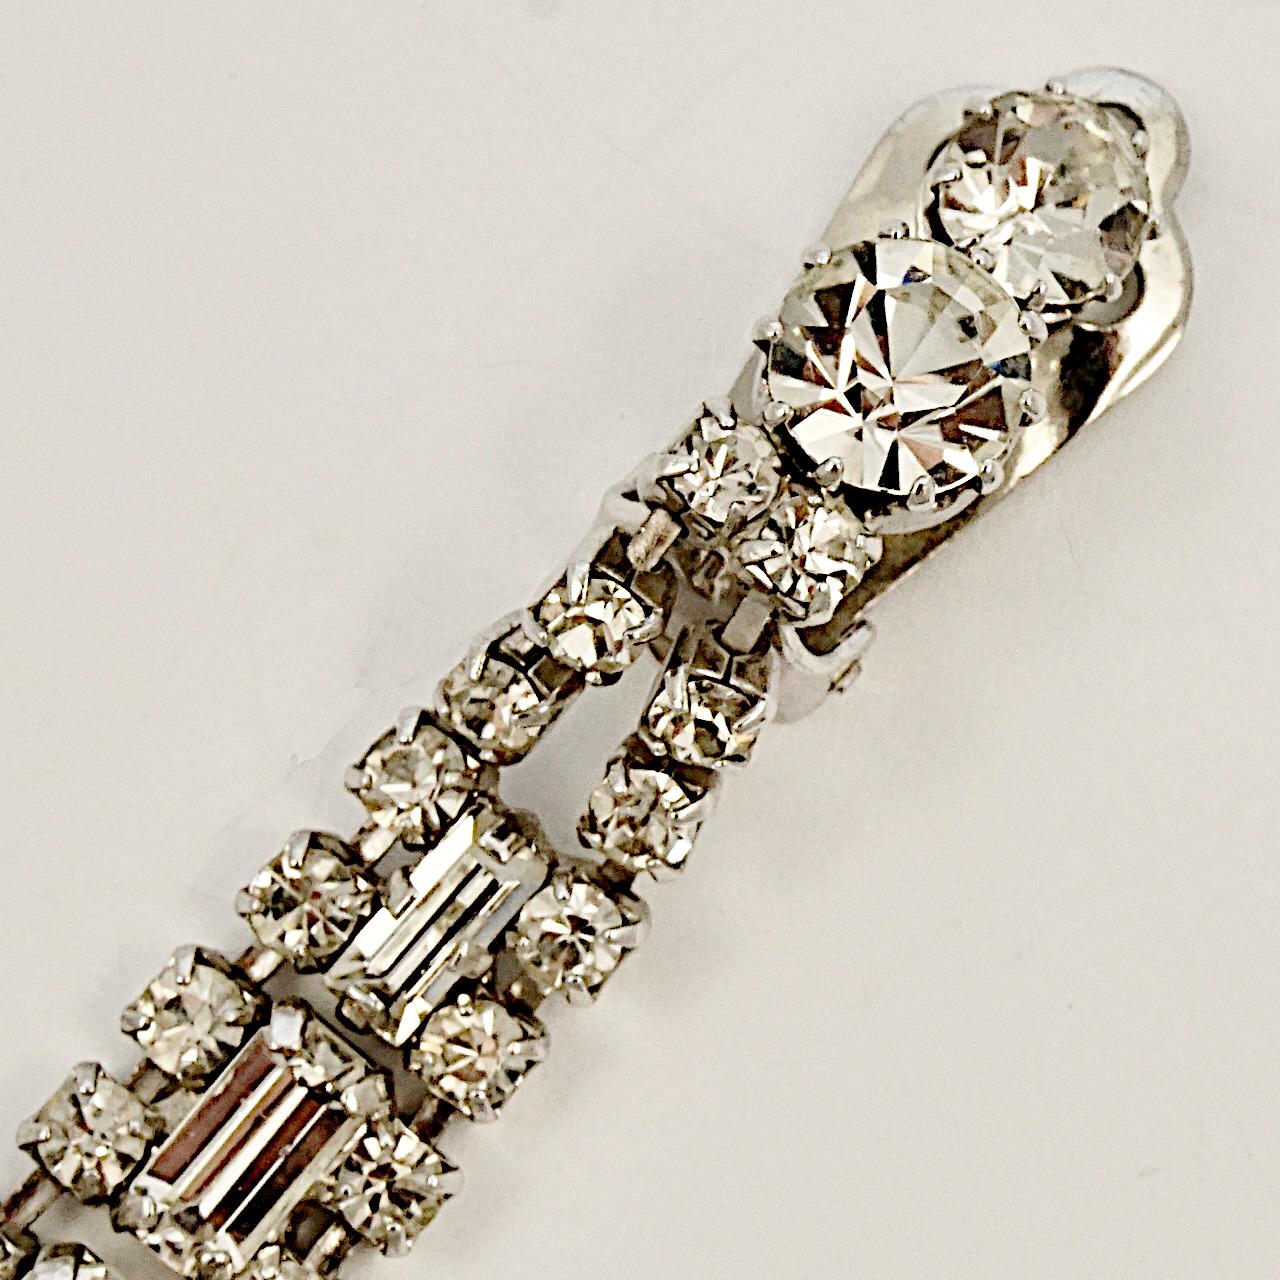 Fabulous silver tone clip on earrings, with sparkling baguette and round rhinestones. Measuring length 6 cm / 2.36 inches. The earrings are in very good condition, they look unworn.

These are beautiful vintage drop earrings for the evening or a